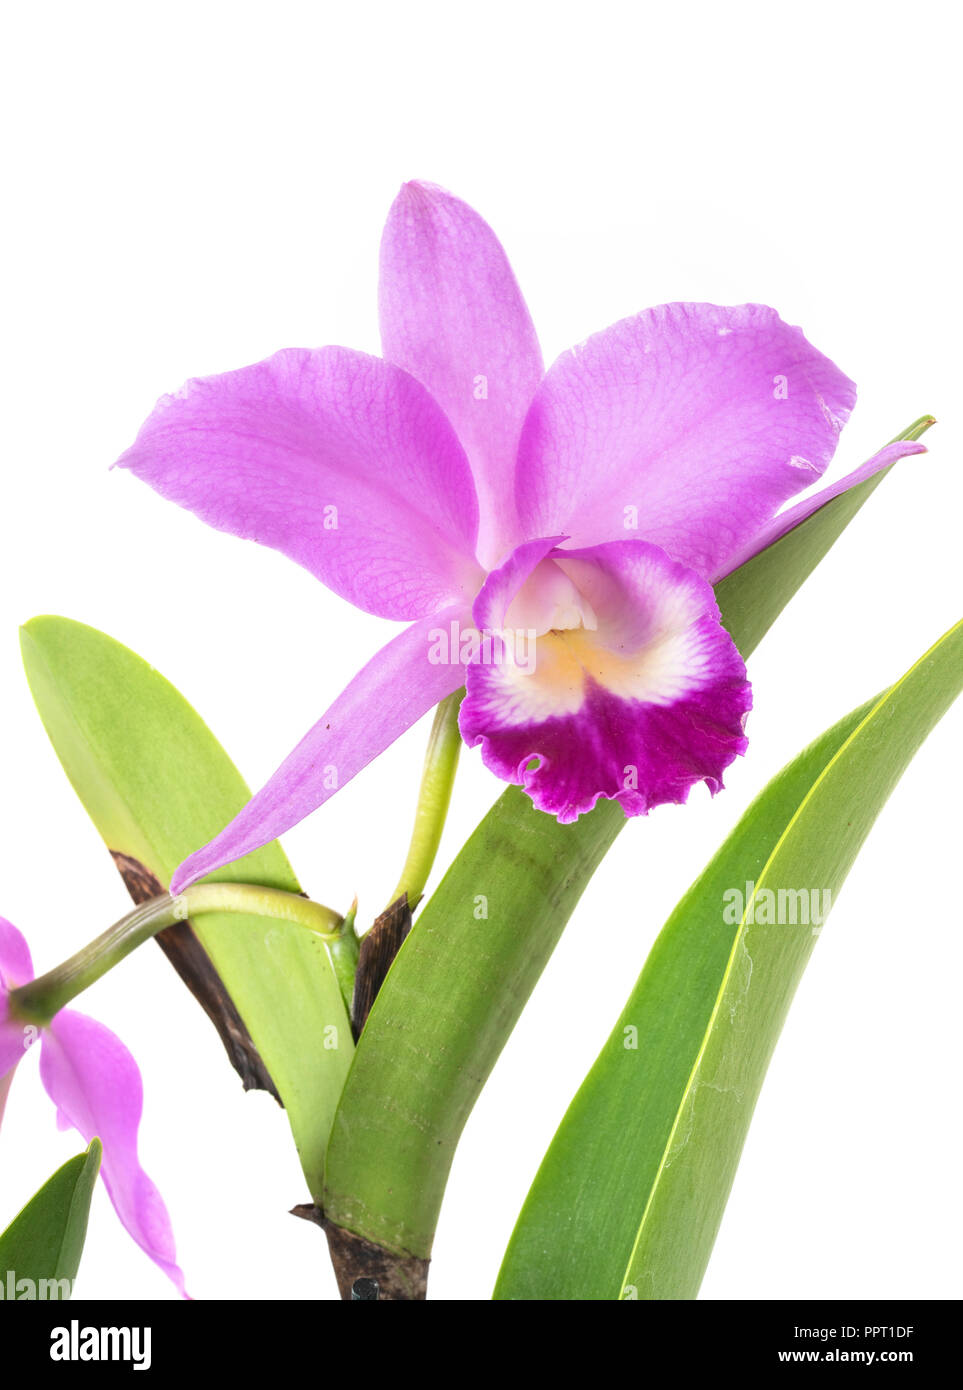 Cattleya plant in front of white background Stock Photo